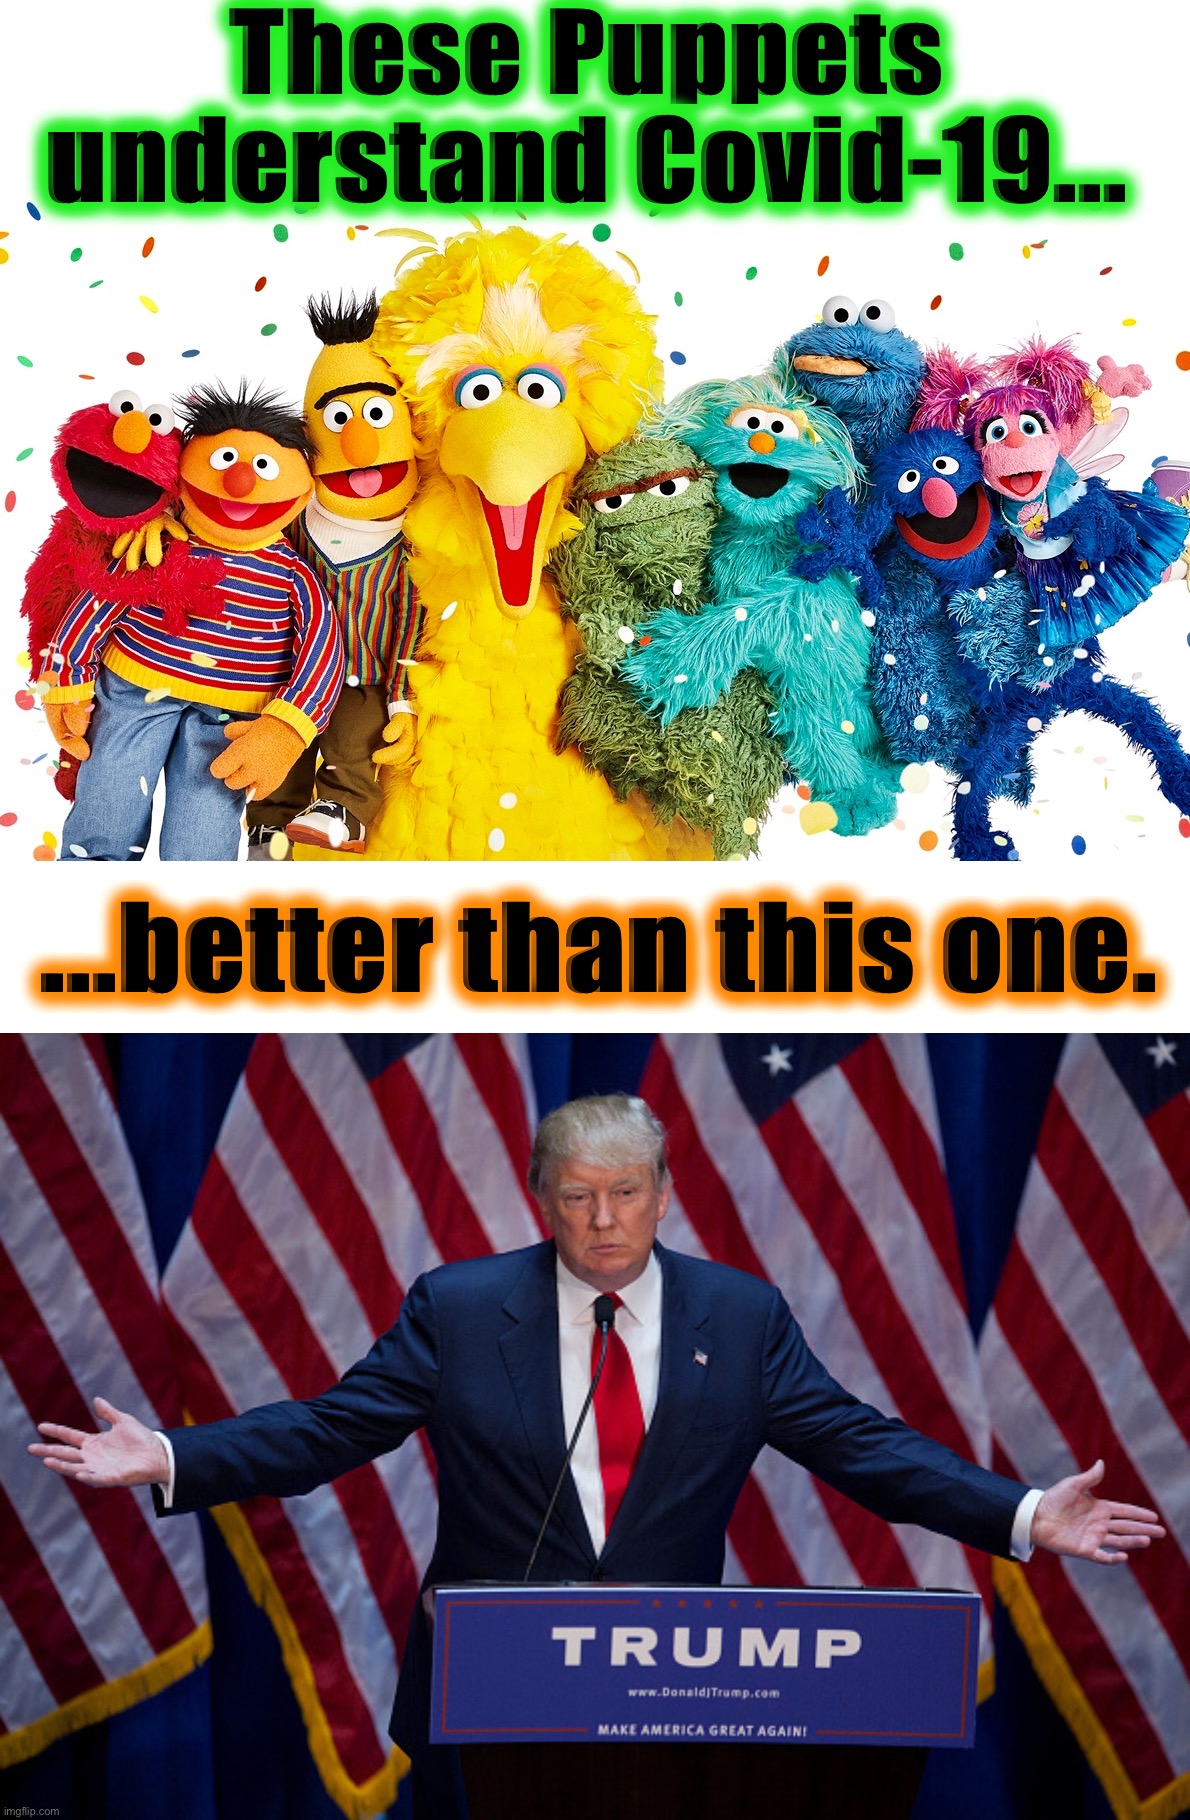 Covidiot-In-Chief meets his Cloth Overlords | These Puppets understand Covid-19... ...better than this one. | image tagged in donald trump,sesame street,memes,covidiots,coronavirus meme,world war c | made w/ Imgflip meme maker